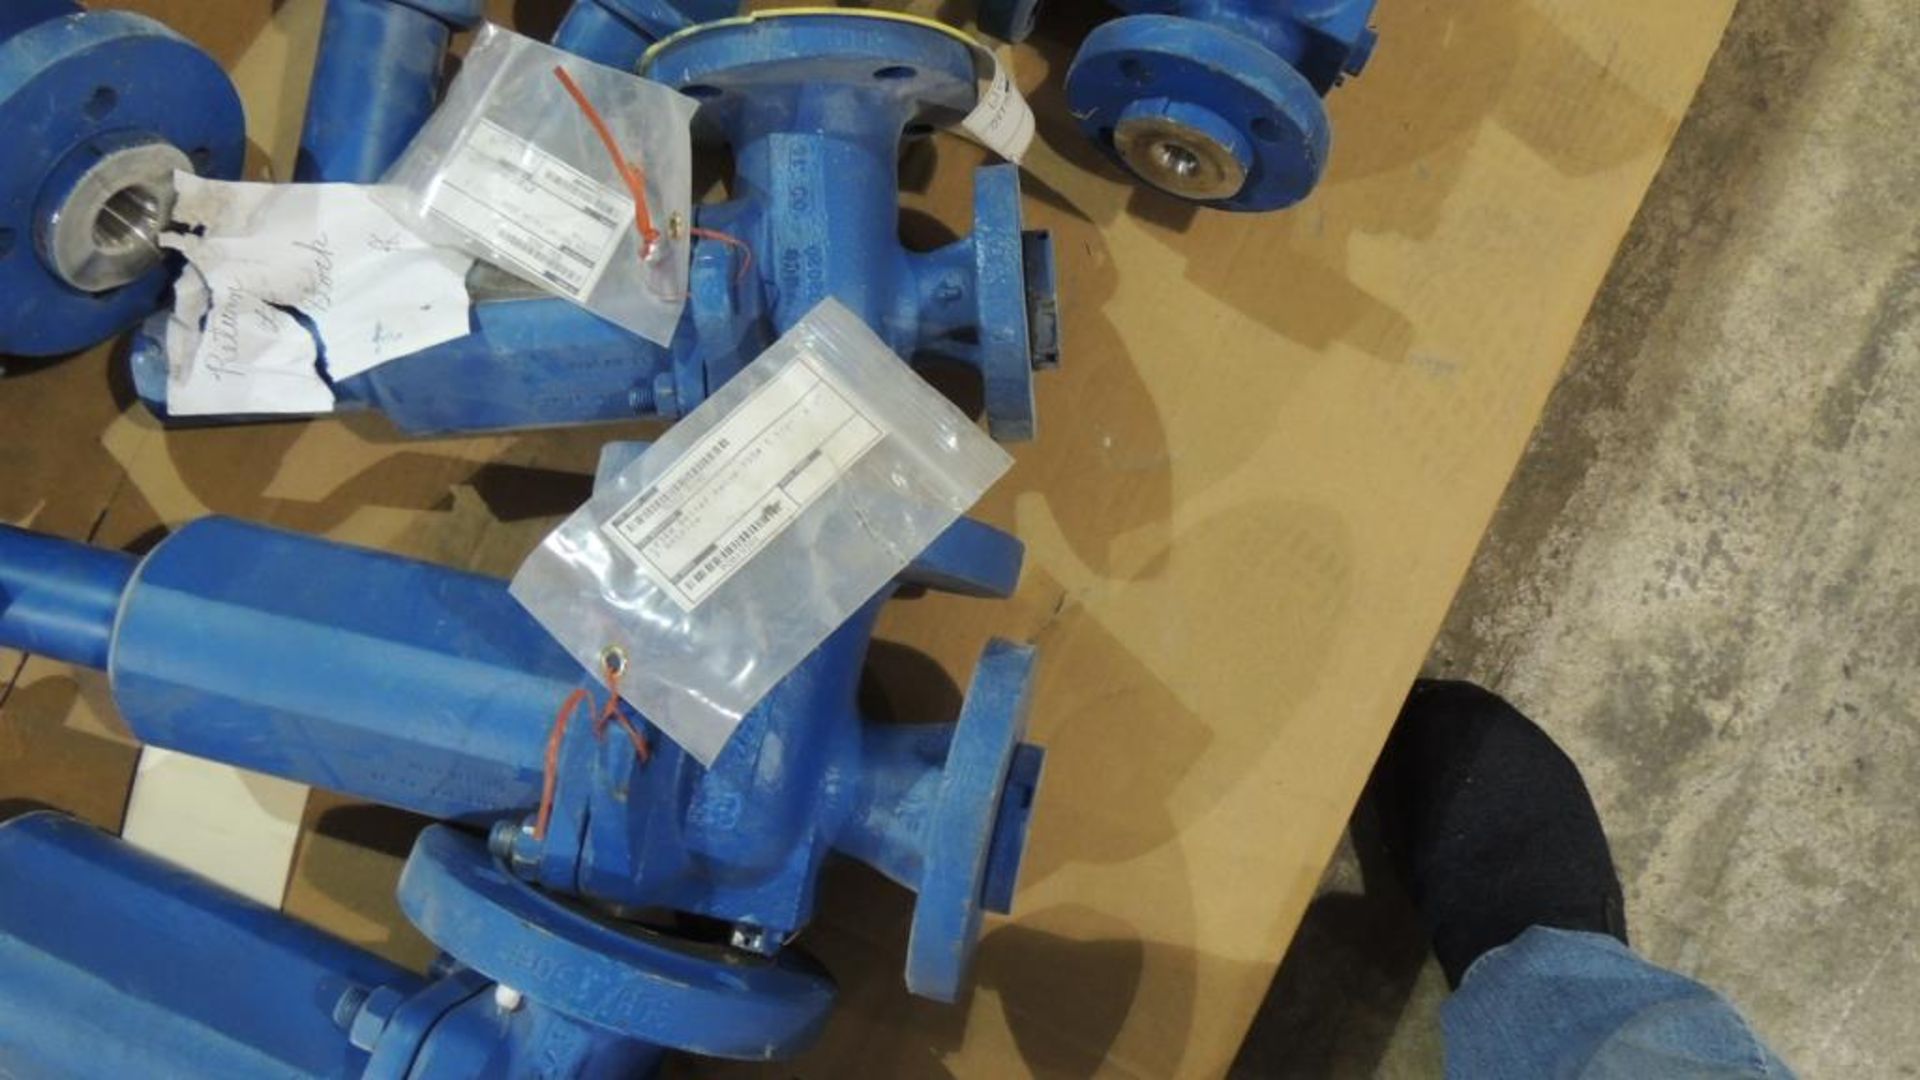 Large Quantity of Leser Relief and Safety Valves, plus Spare Parts Kits - Image 60 of 374